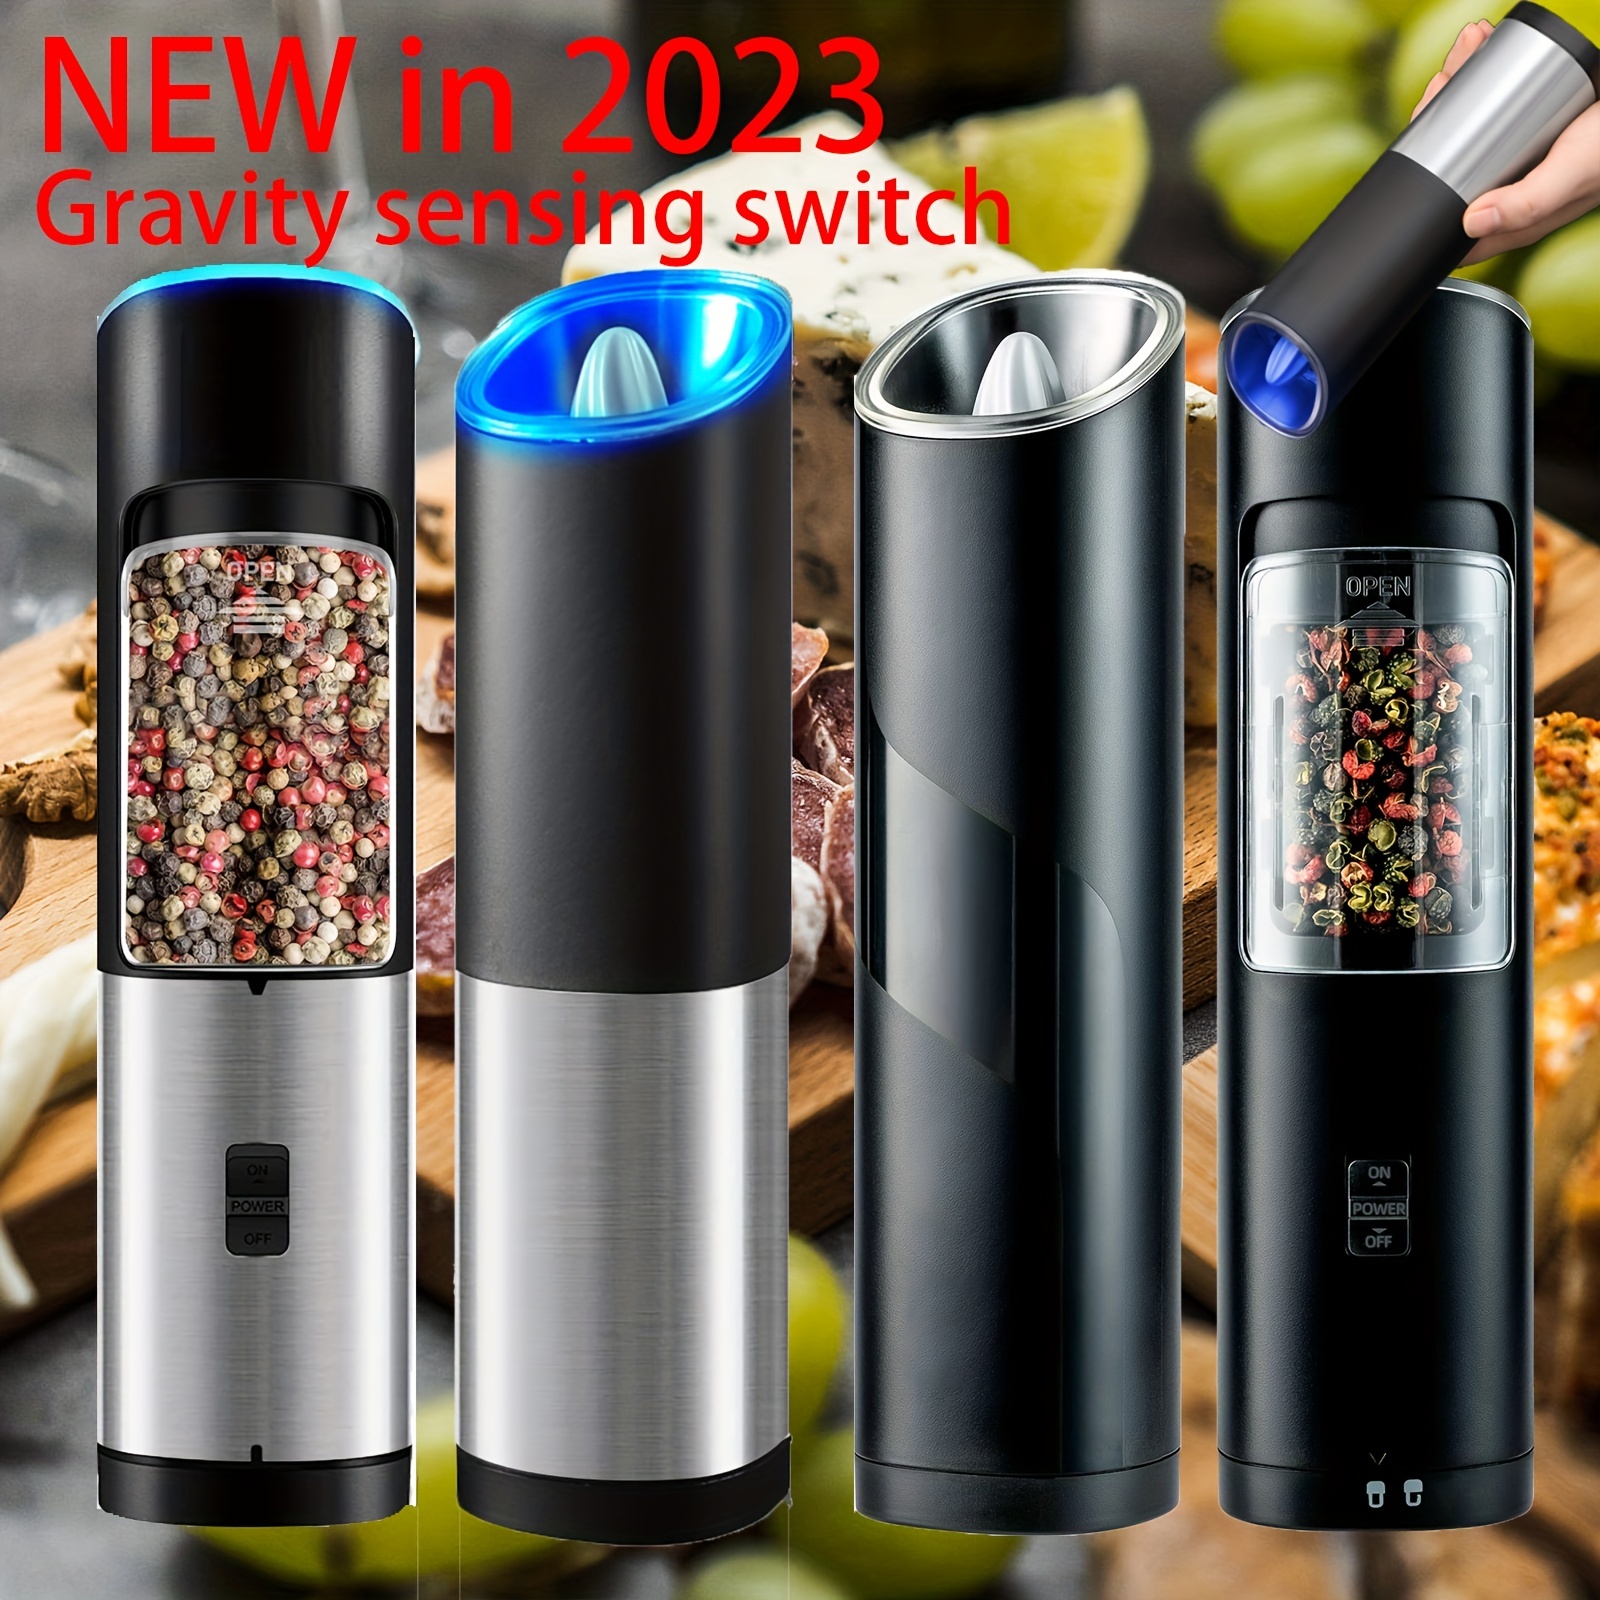 Salt and pepper mill Small Appliances at